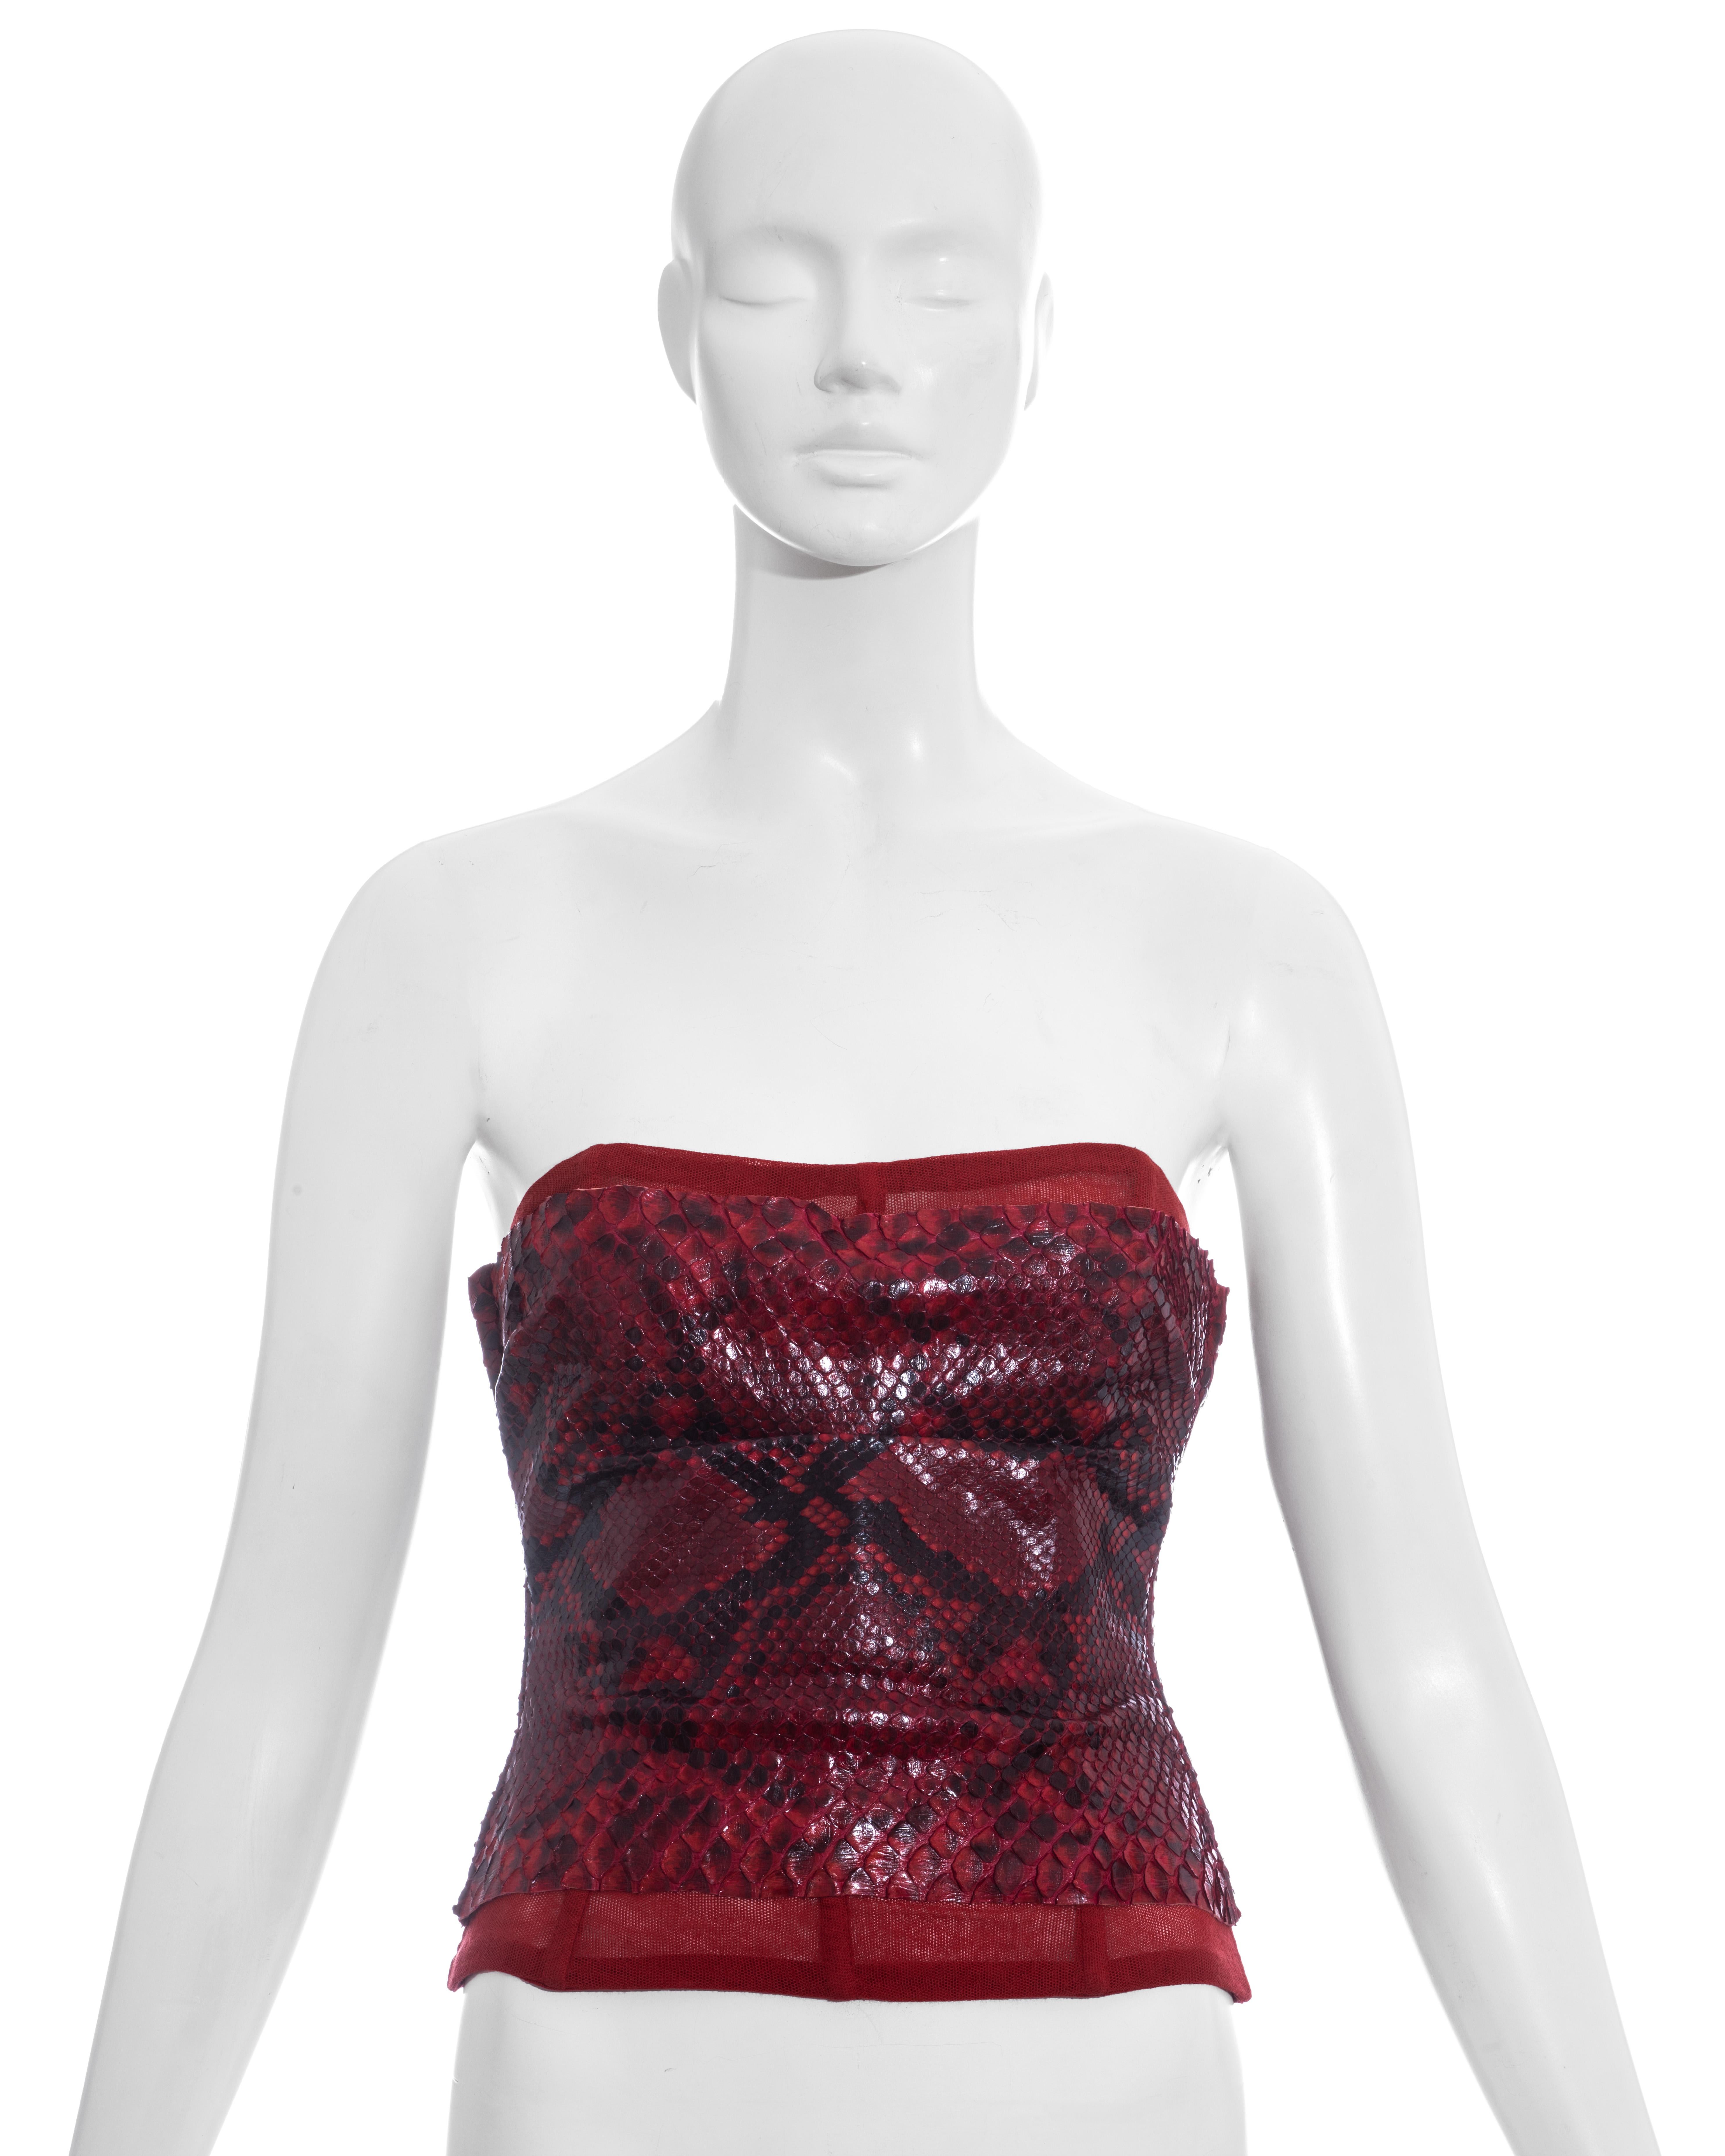 Dolce & Gabbana red python bustier with corseted mesh underlay and back zip fastenings. 

Spring-Summer 2005